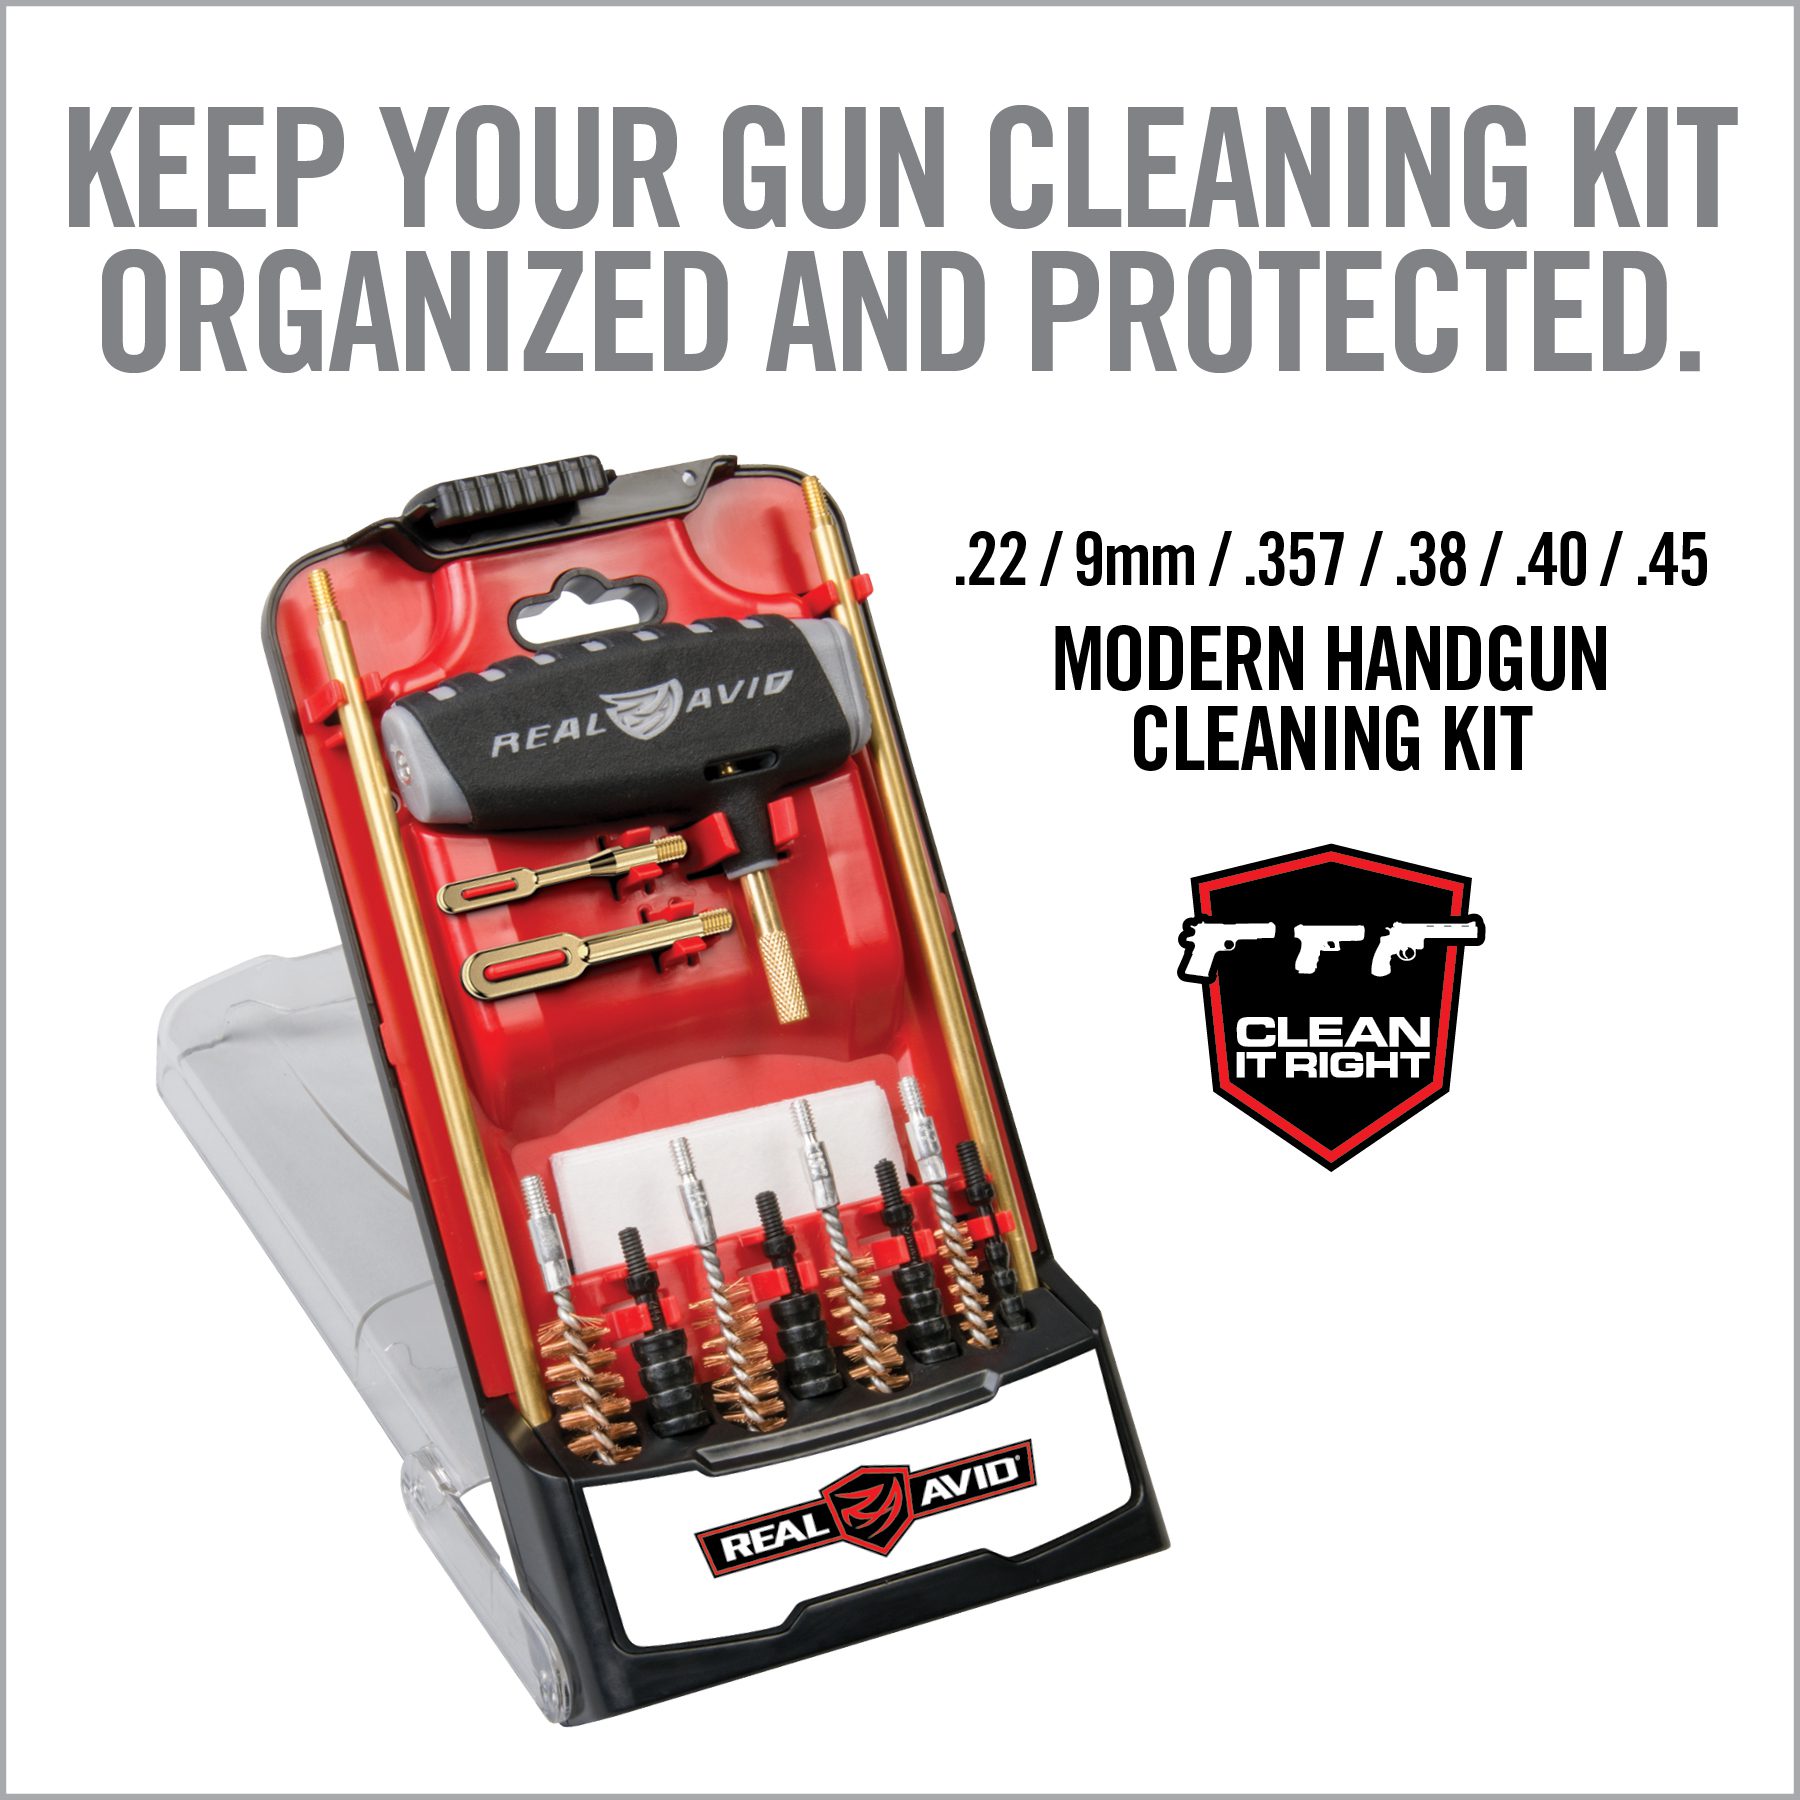 a gun cleaning kit is packed in a case